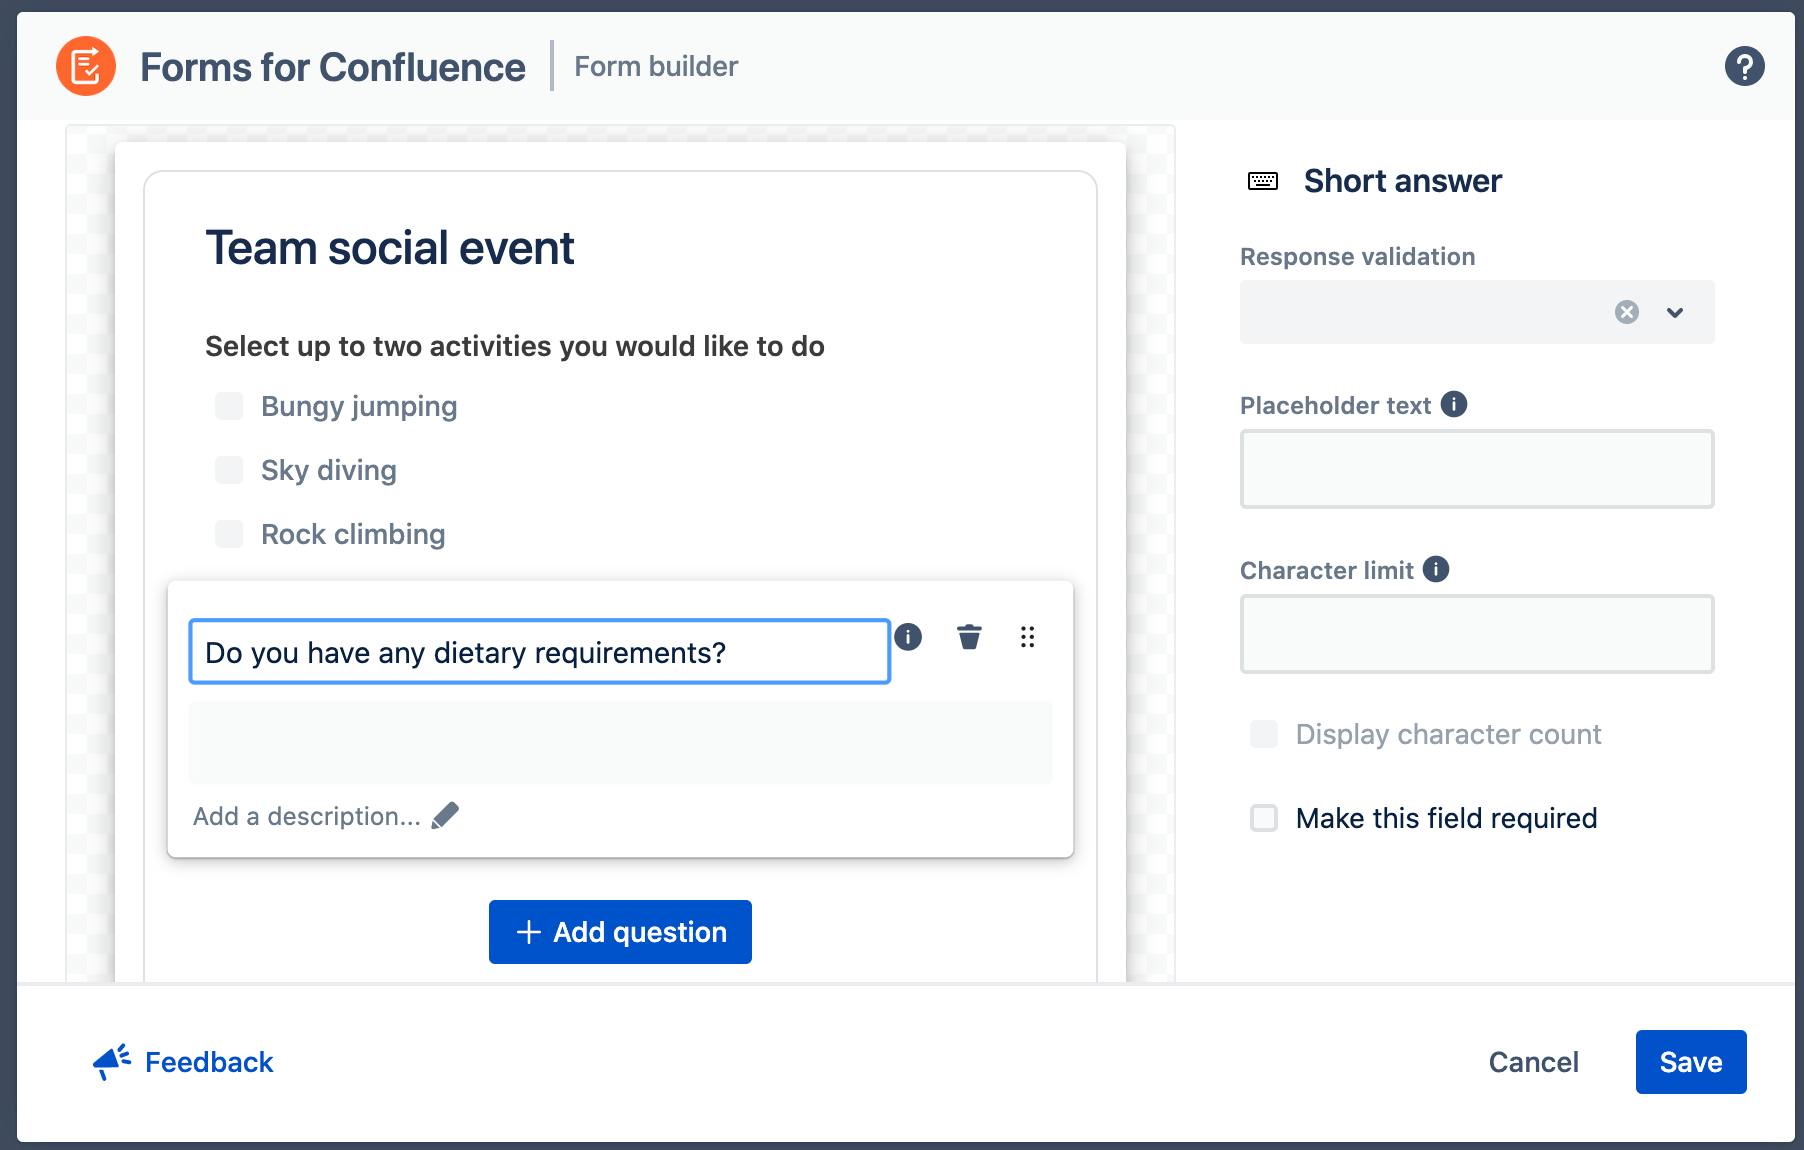 Building a form using Forms for Confluence